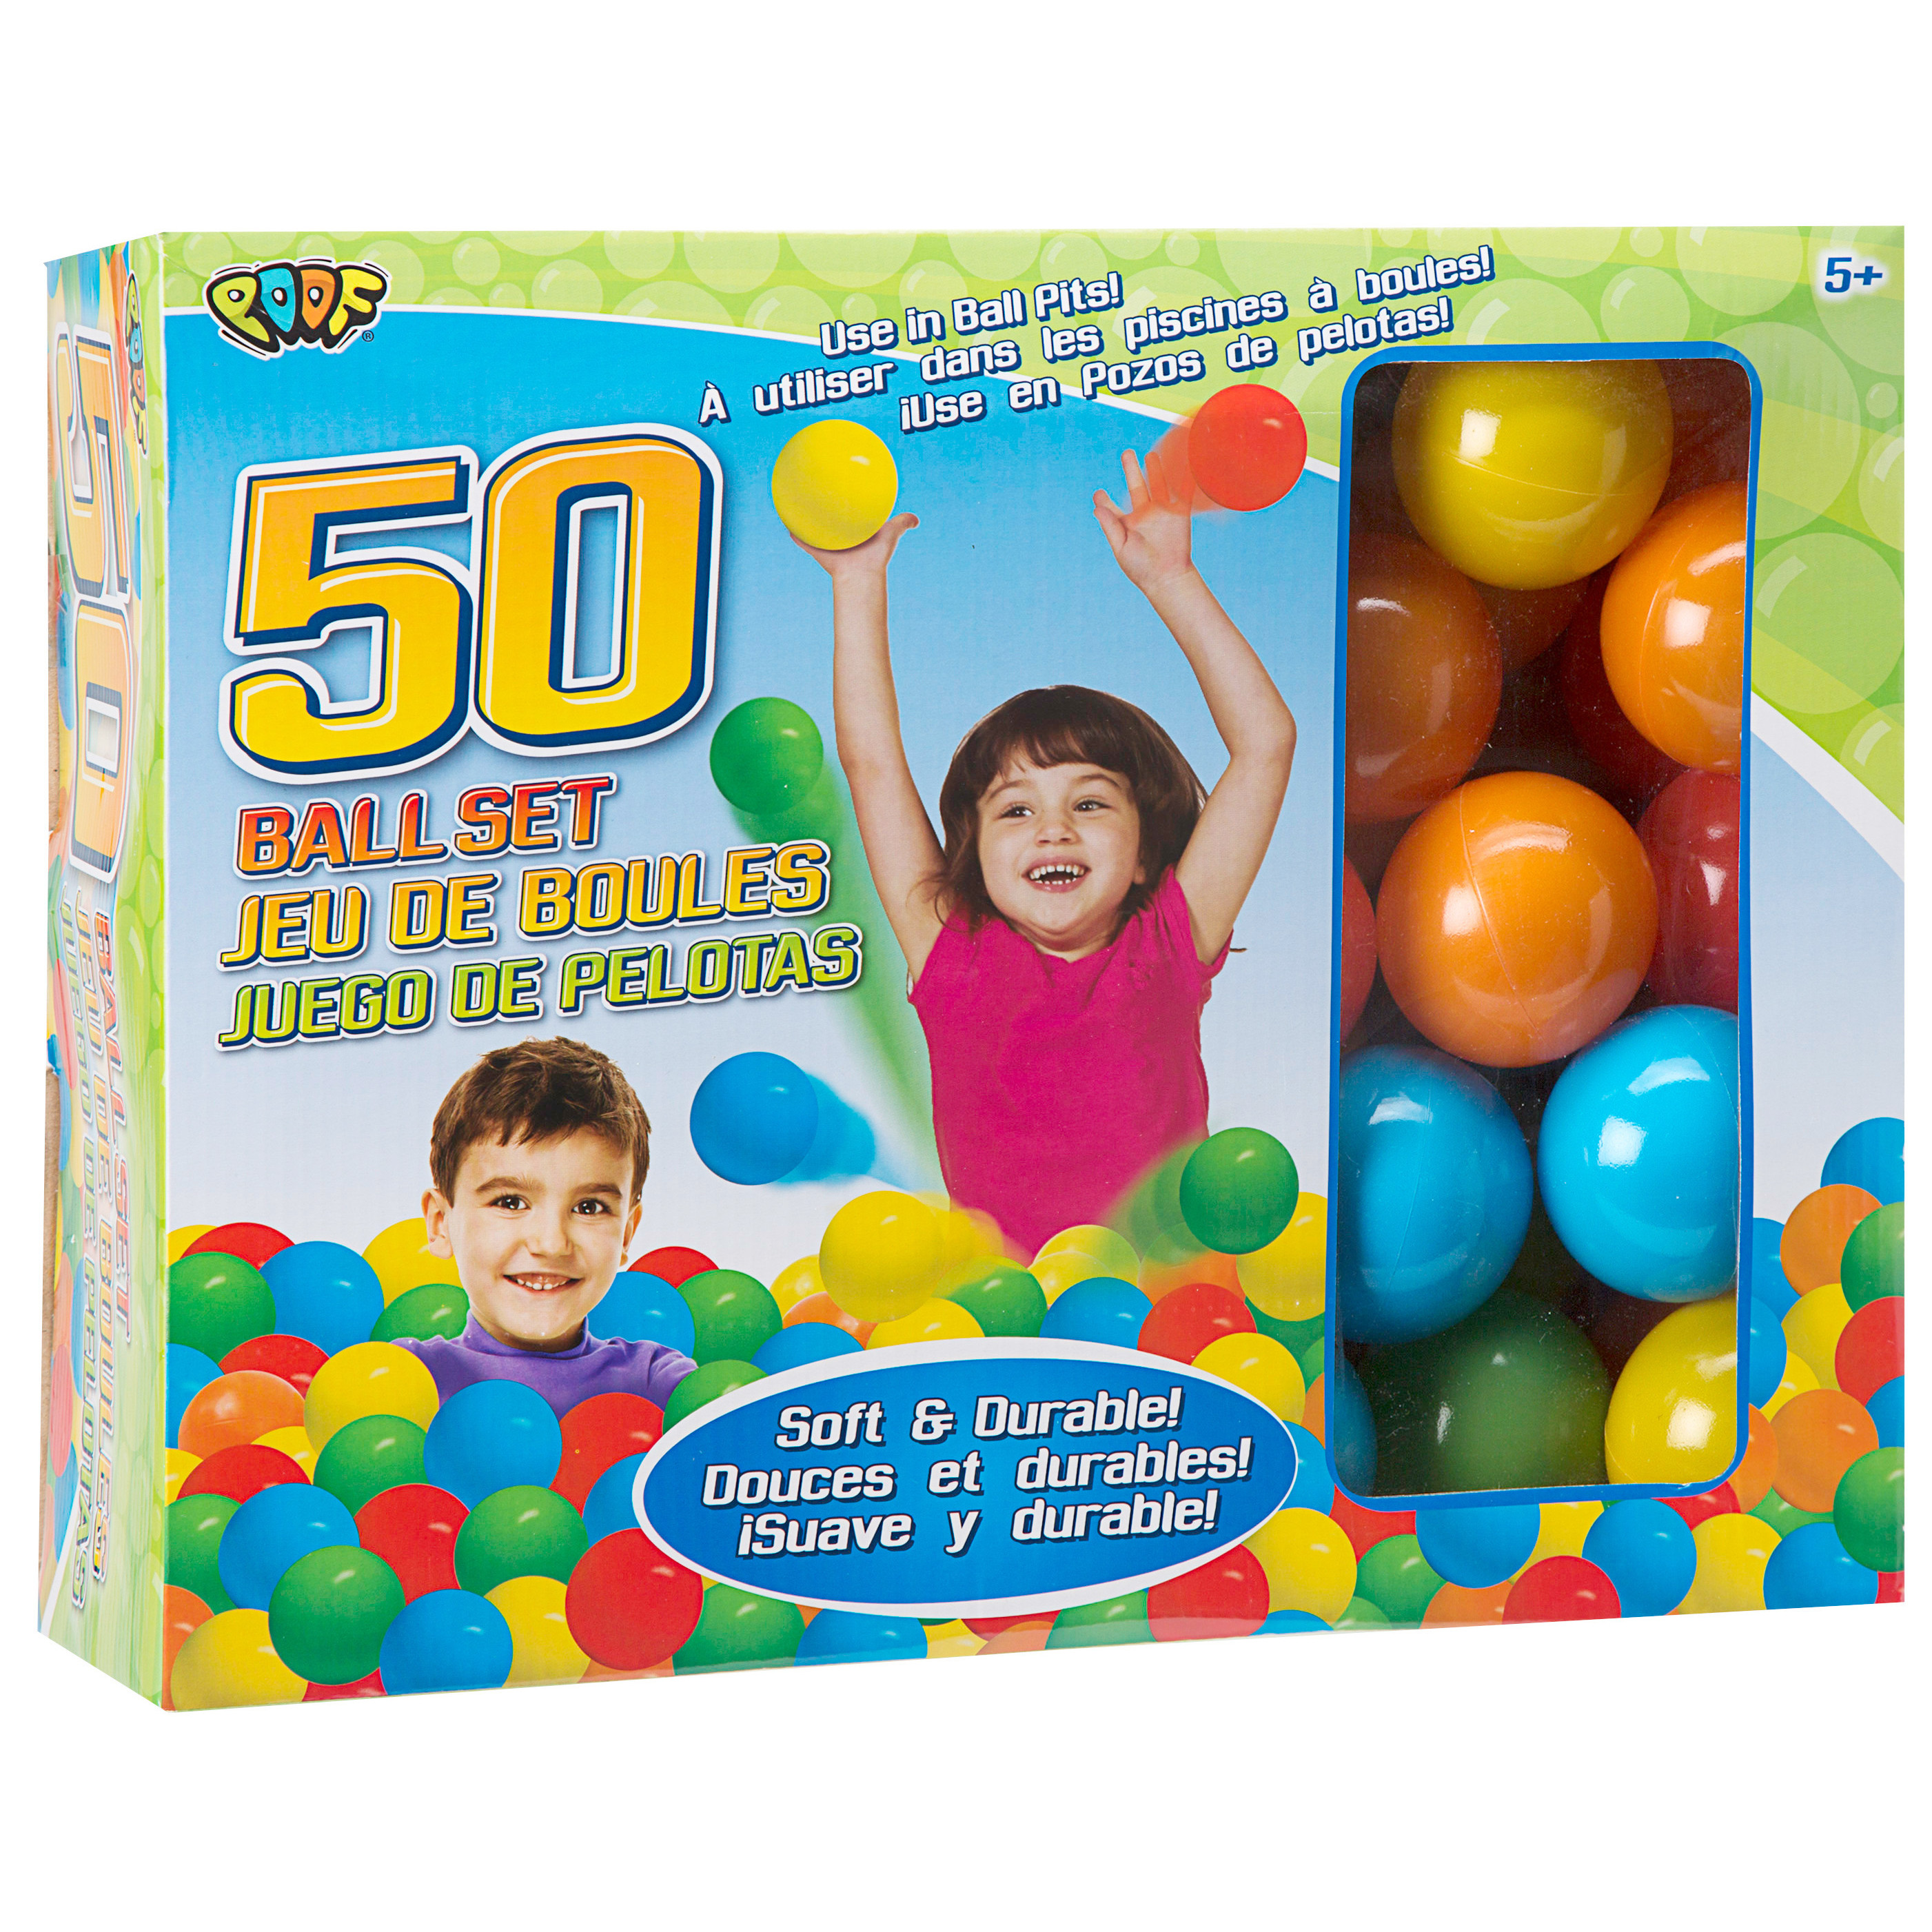 POOF 50 Ball Set - image 1 of 3